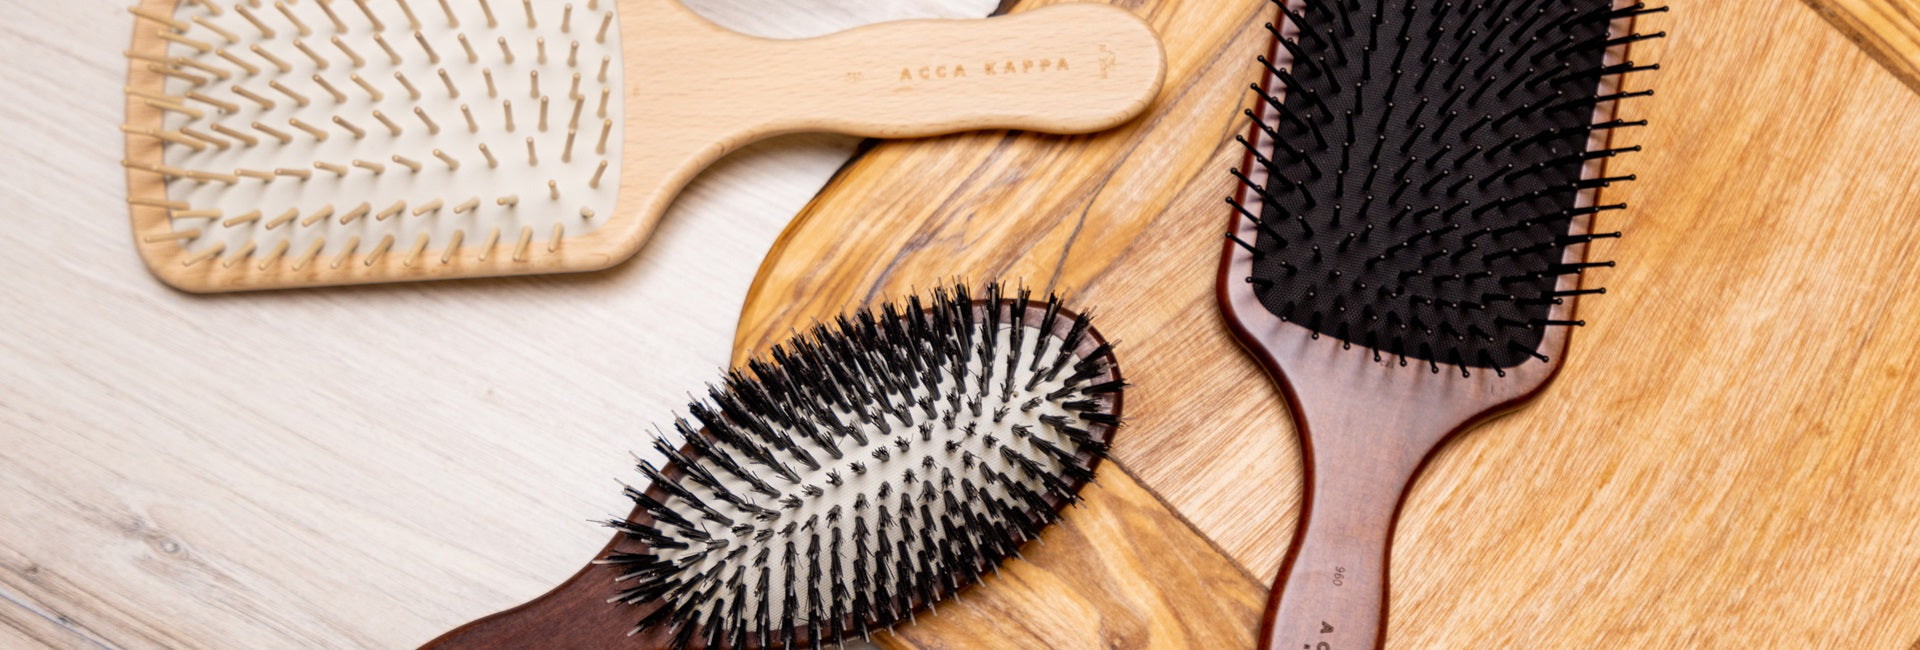 collections/Acca_Kappa_new_Hairbrush_Sets_-_Collections.jpg